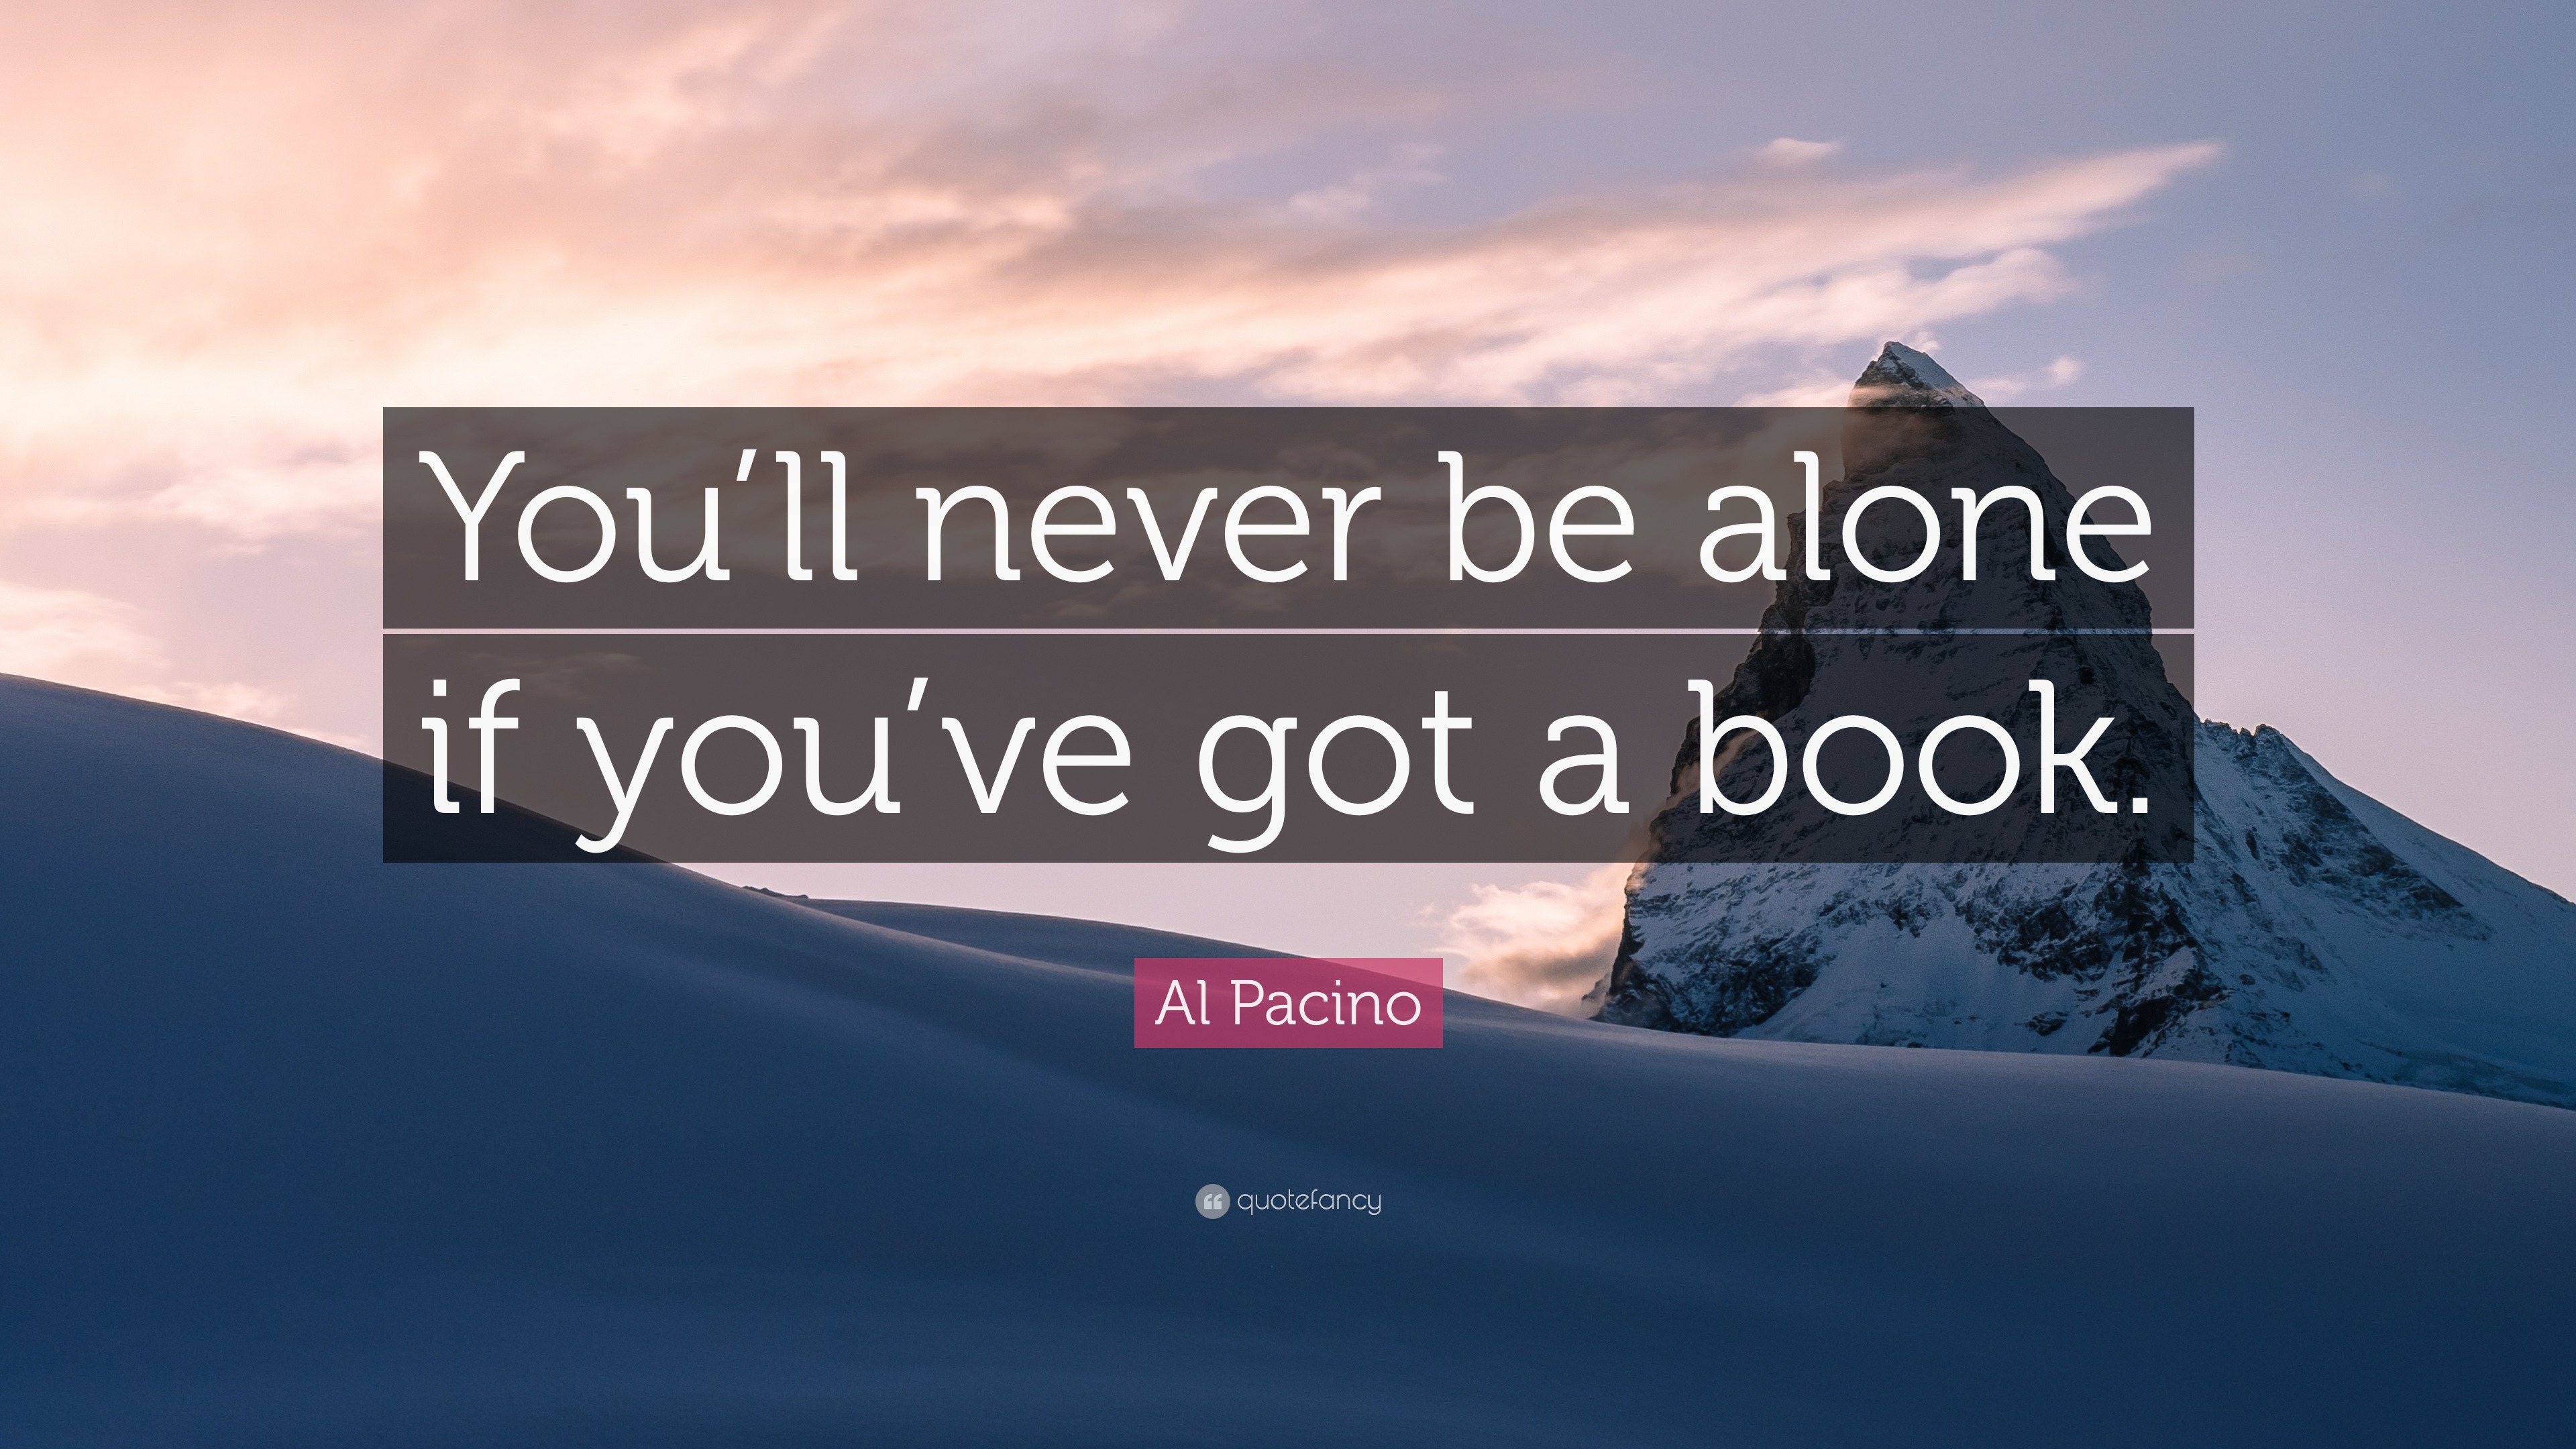 Al Pacino Quote: “You’ll never be alone if you’ve got a book.”